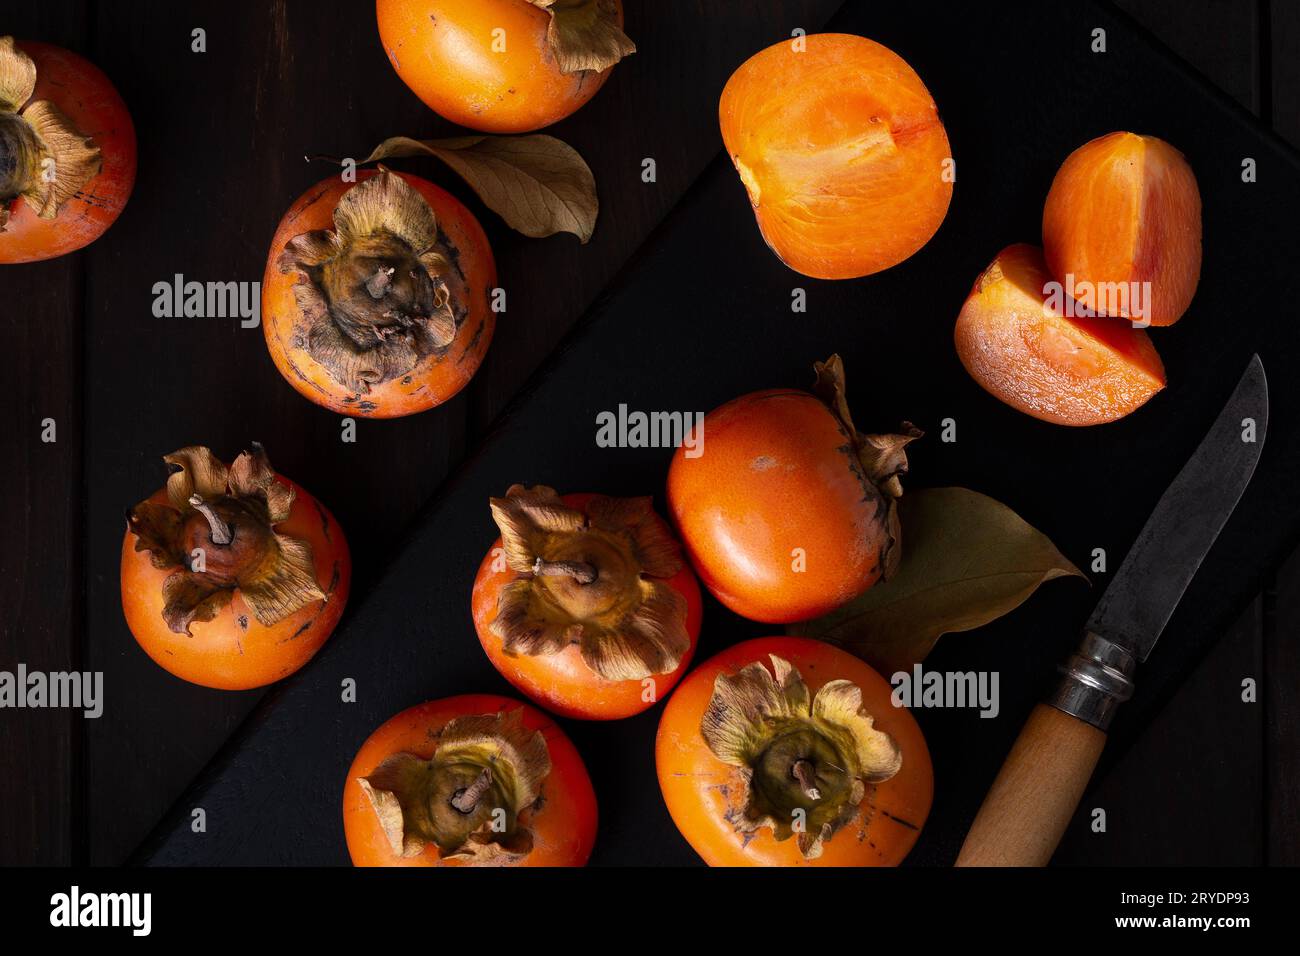 Persimmon still life in low key Stock Photo